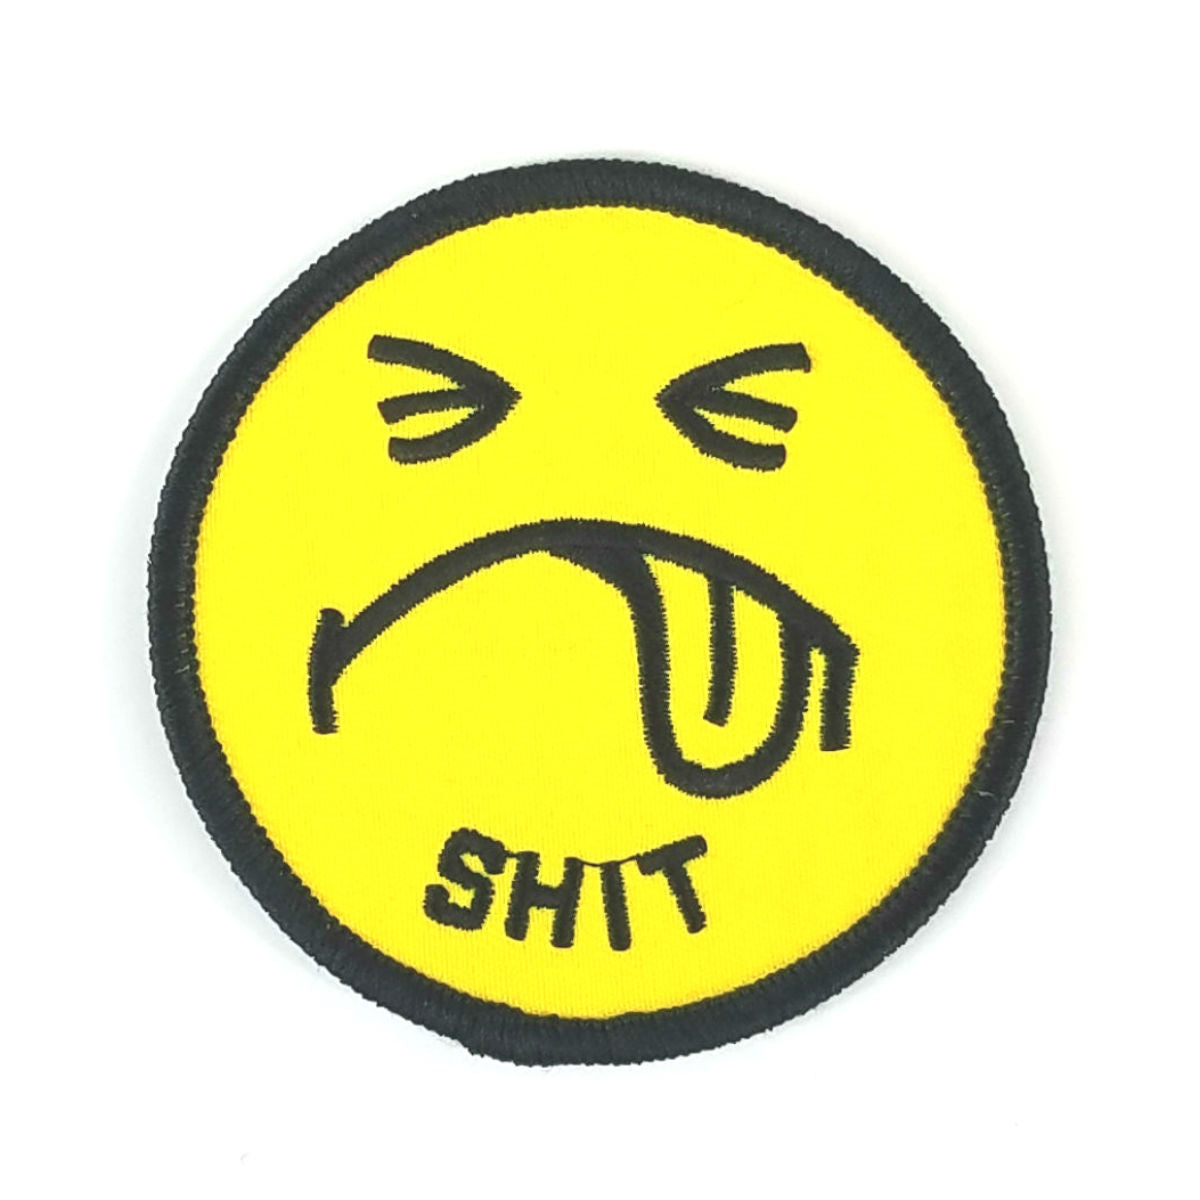 3" round yellow and black embroidered patch of 70s style frowny face with tongue out and "SHIT" exclamation text